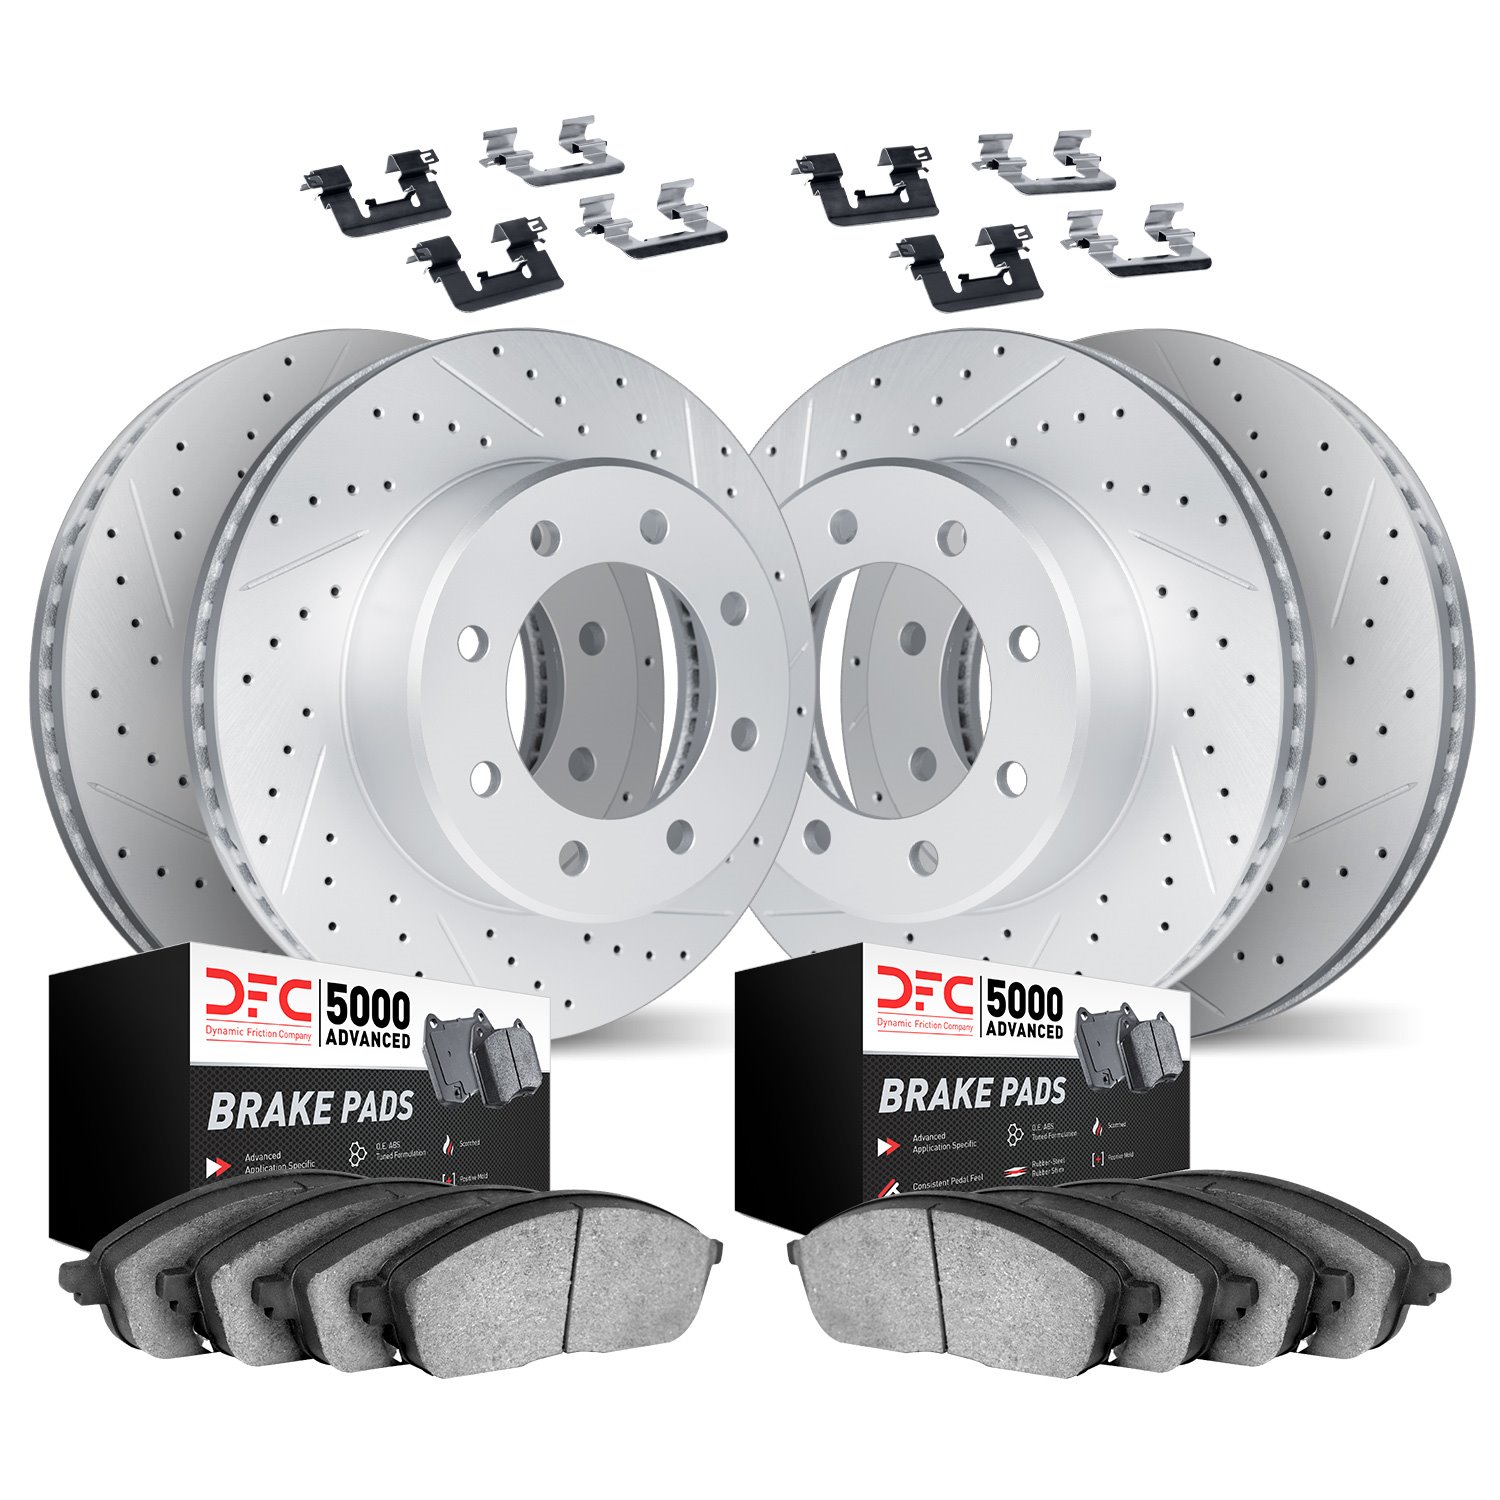 2514-54262 Geoperformance Drilled/Slotted Rotors w/5000 Advanced Brake Pads Kit & Hardware, Fits Select Ford/Lincoln/Mercury/Maz